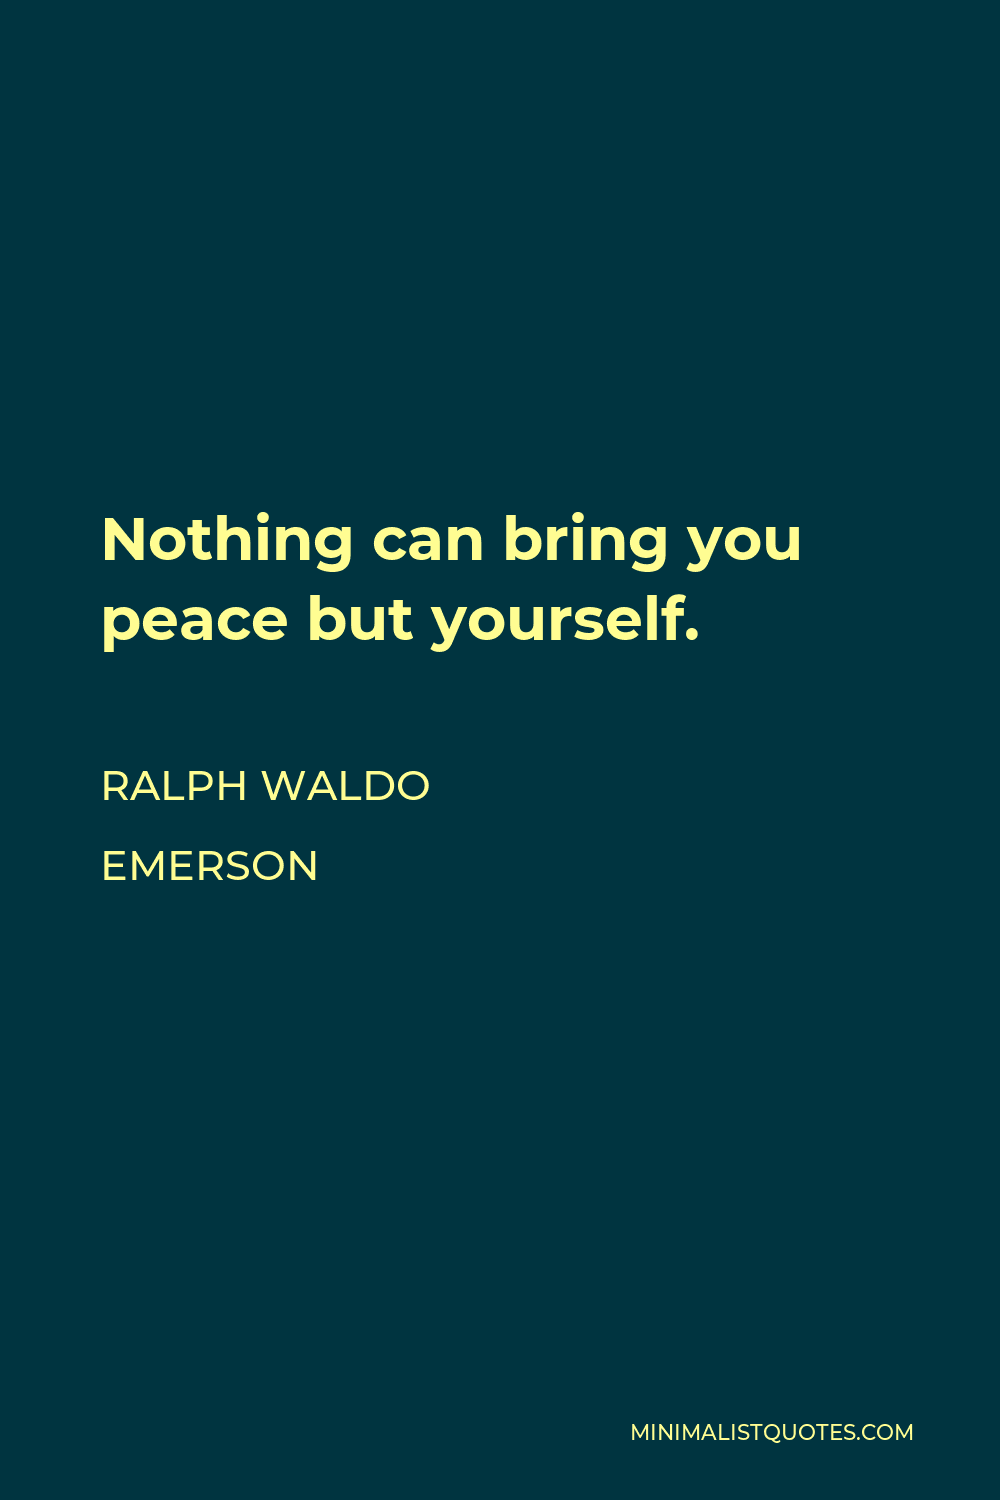 Ralph Waldo Emerson Quote - Nothing can bring you peace but yourself.